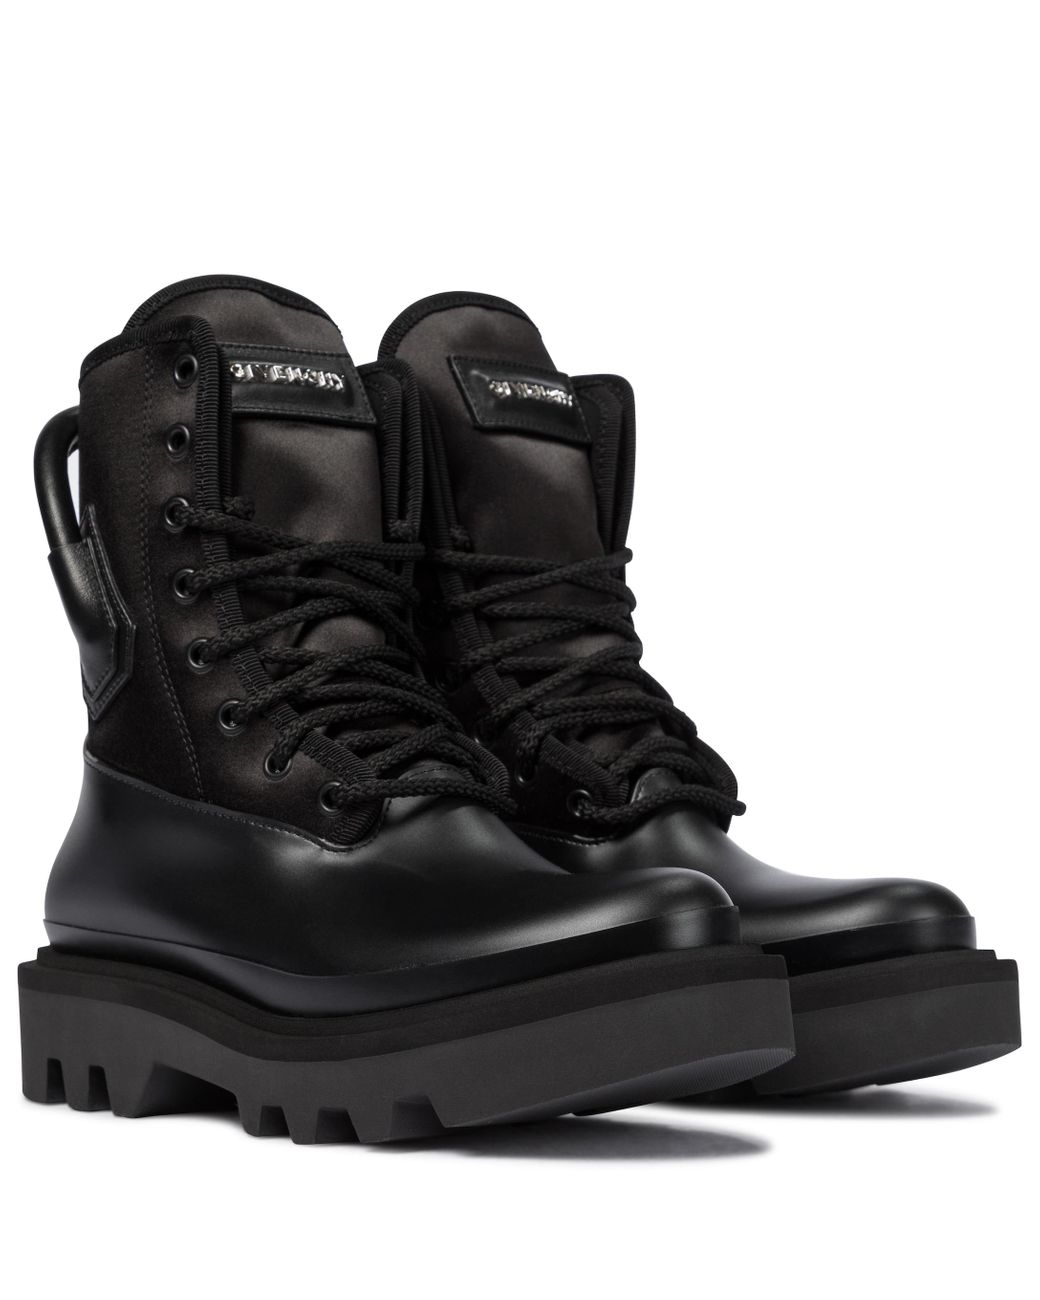 Givenchy Combat Boots in Black - Lyst